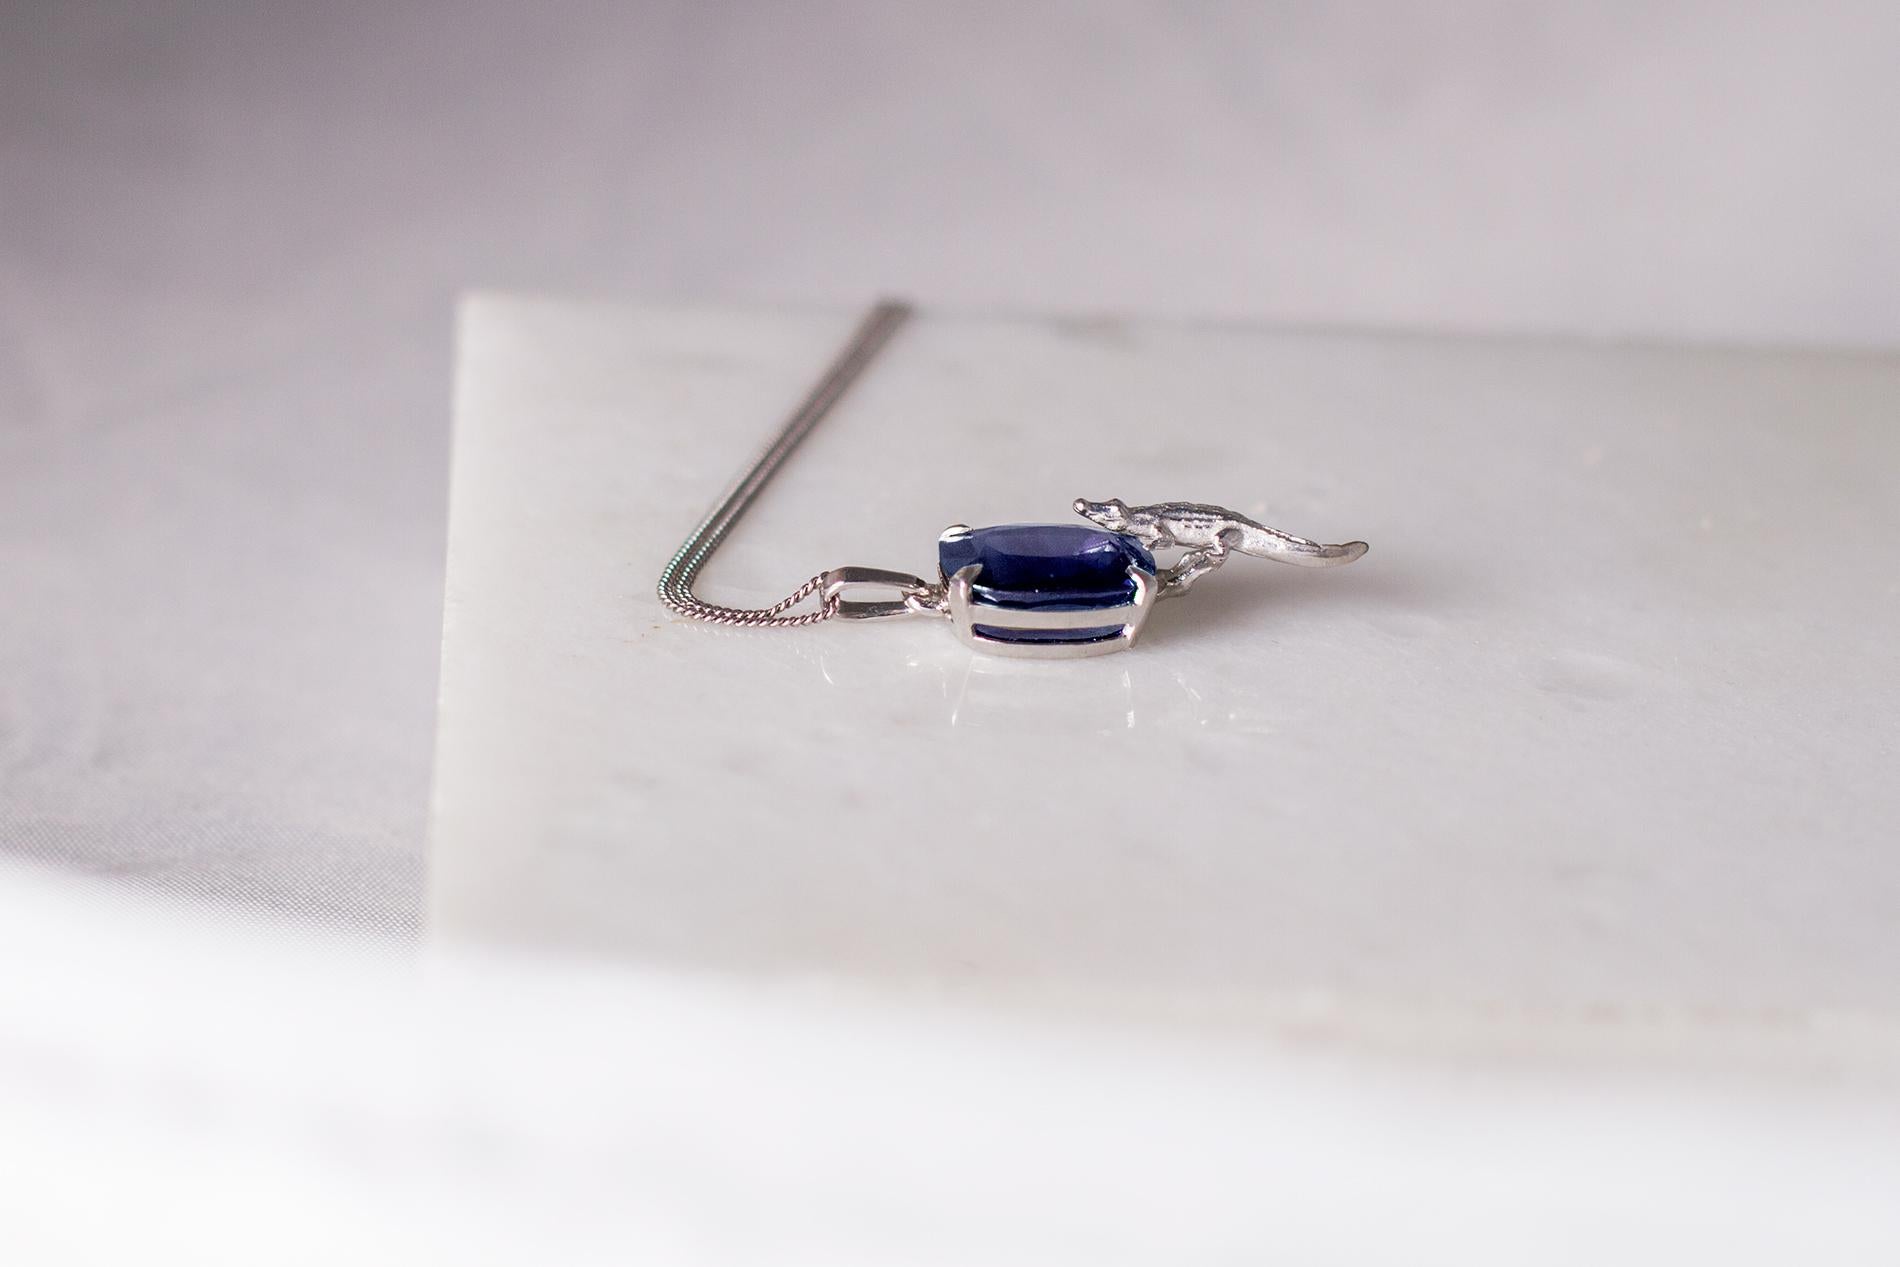 This 18 karat white gold contemporary Mesopotamian pendant necklace is encrusted with GIL certified 7.96 carats natural unheated vivid cornflower blue cushion sapphire, 11.16x8.71 mm. The gem catches eye's attention and well designed in contemporary